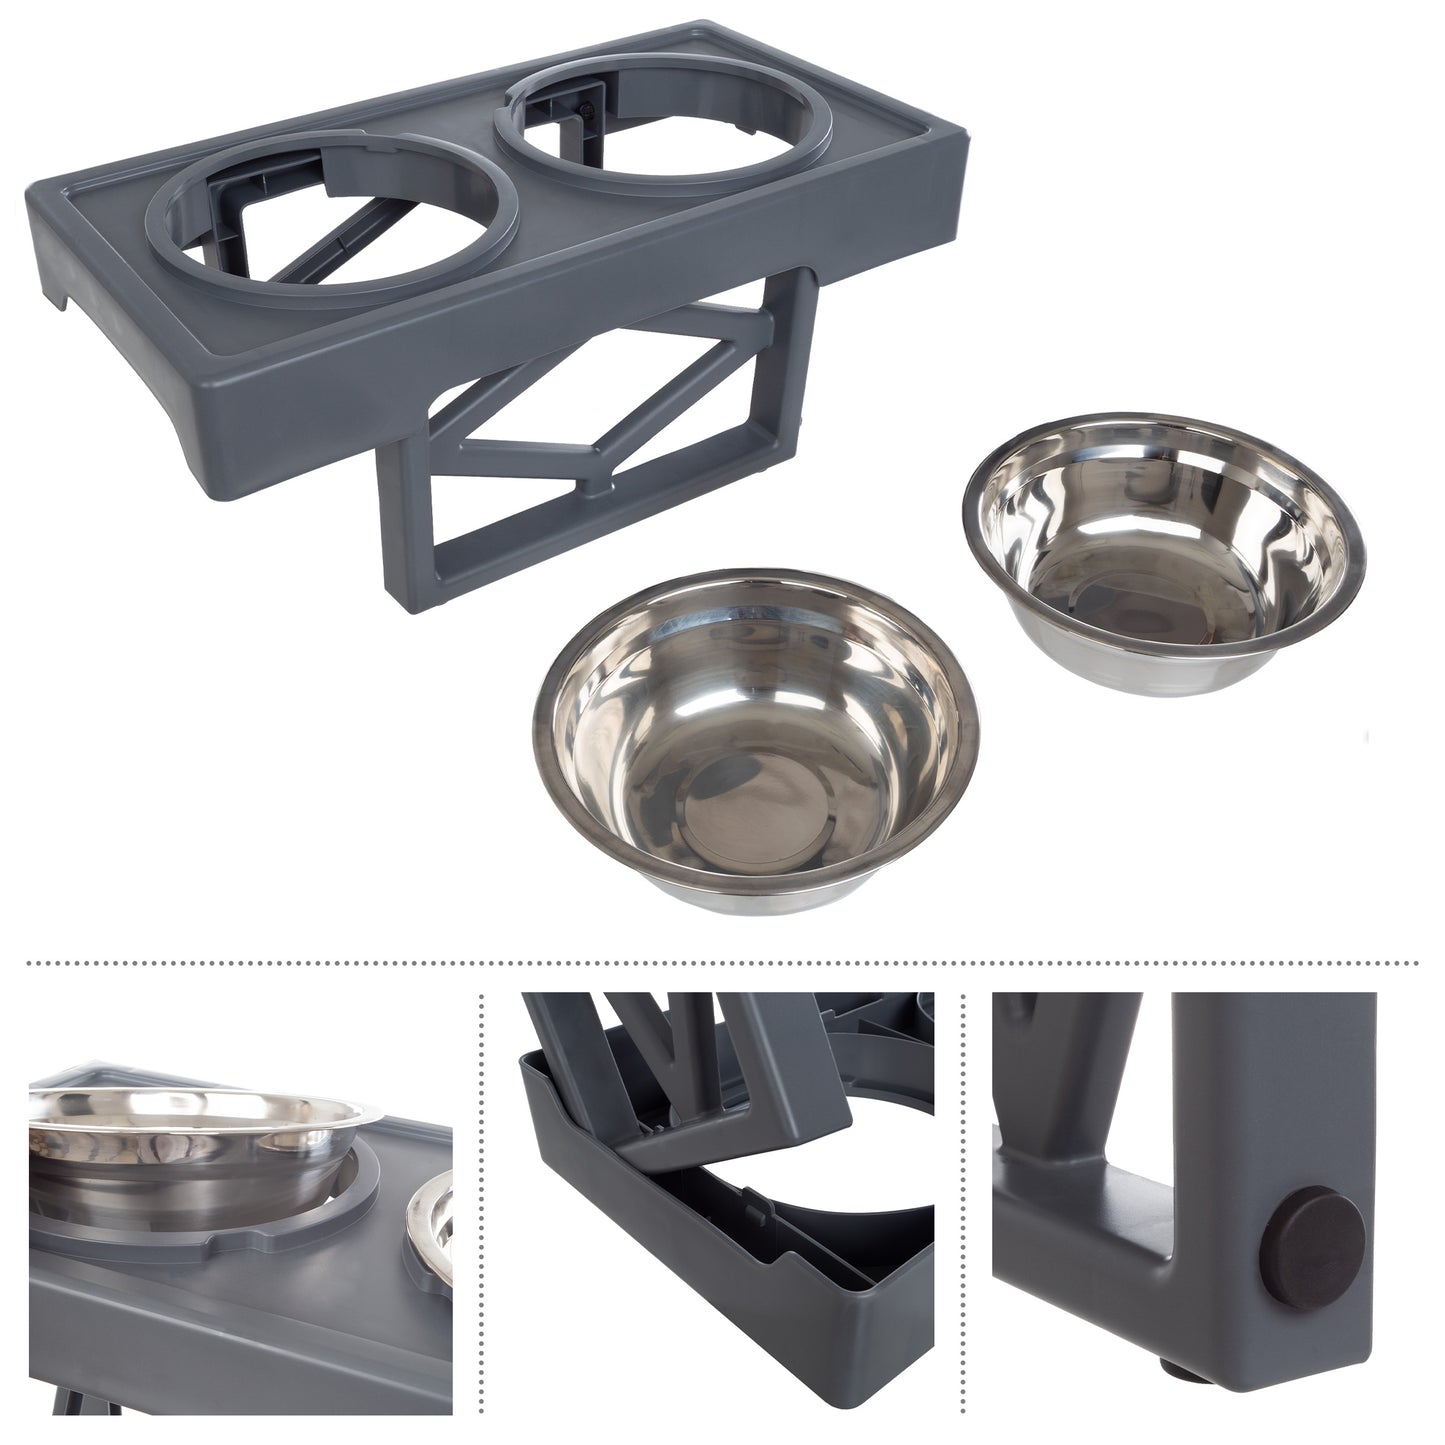 2 Dog Bowls with Adjustable Stand